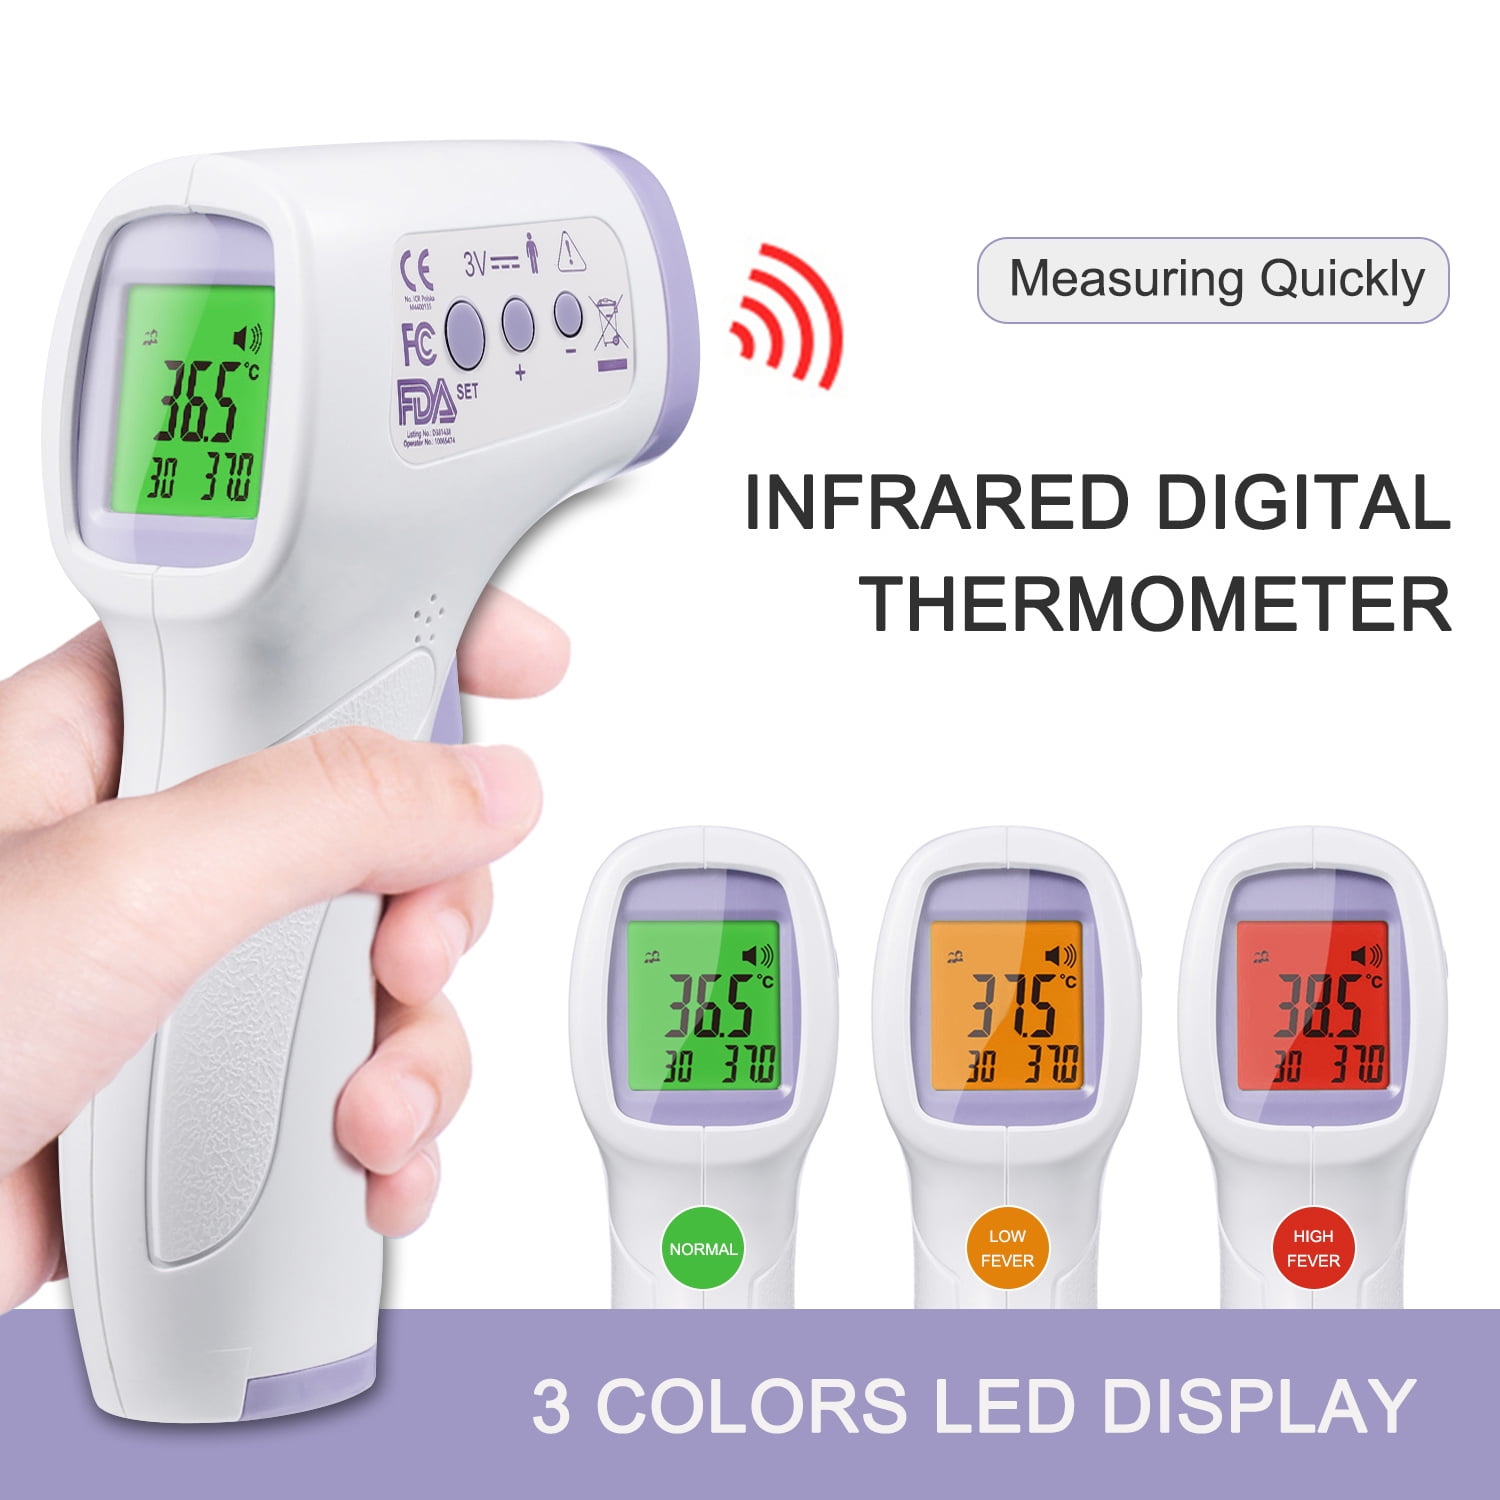 Details about   LPOW Non Contact Infrared Body Thermometer Accurate Reading in 1 Sec NEW in Box 